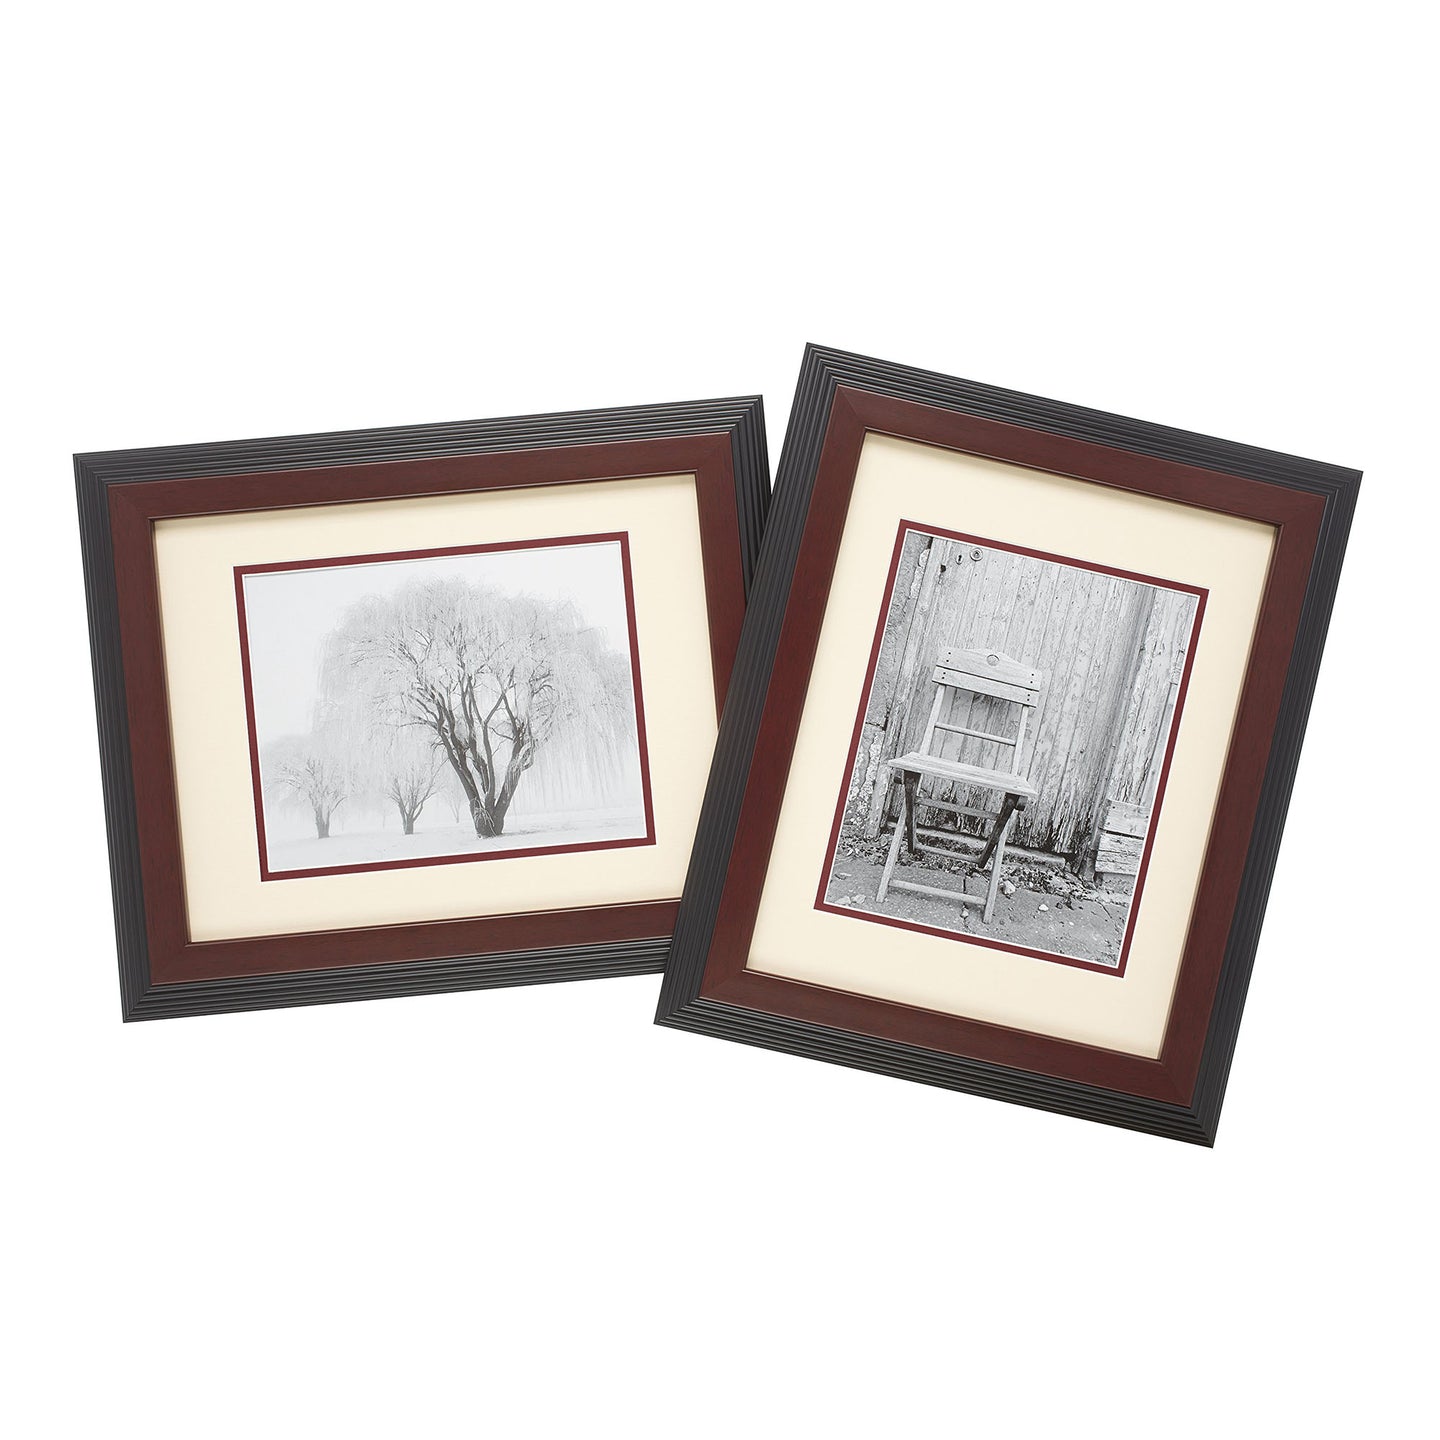 Set of walnut style frames with stepped border and cream matting.